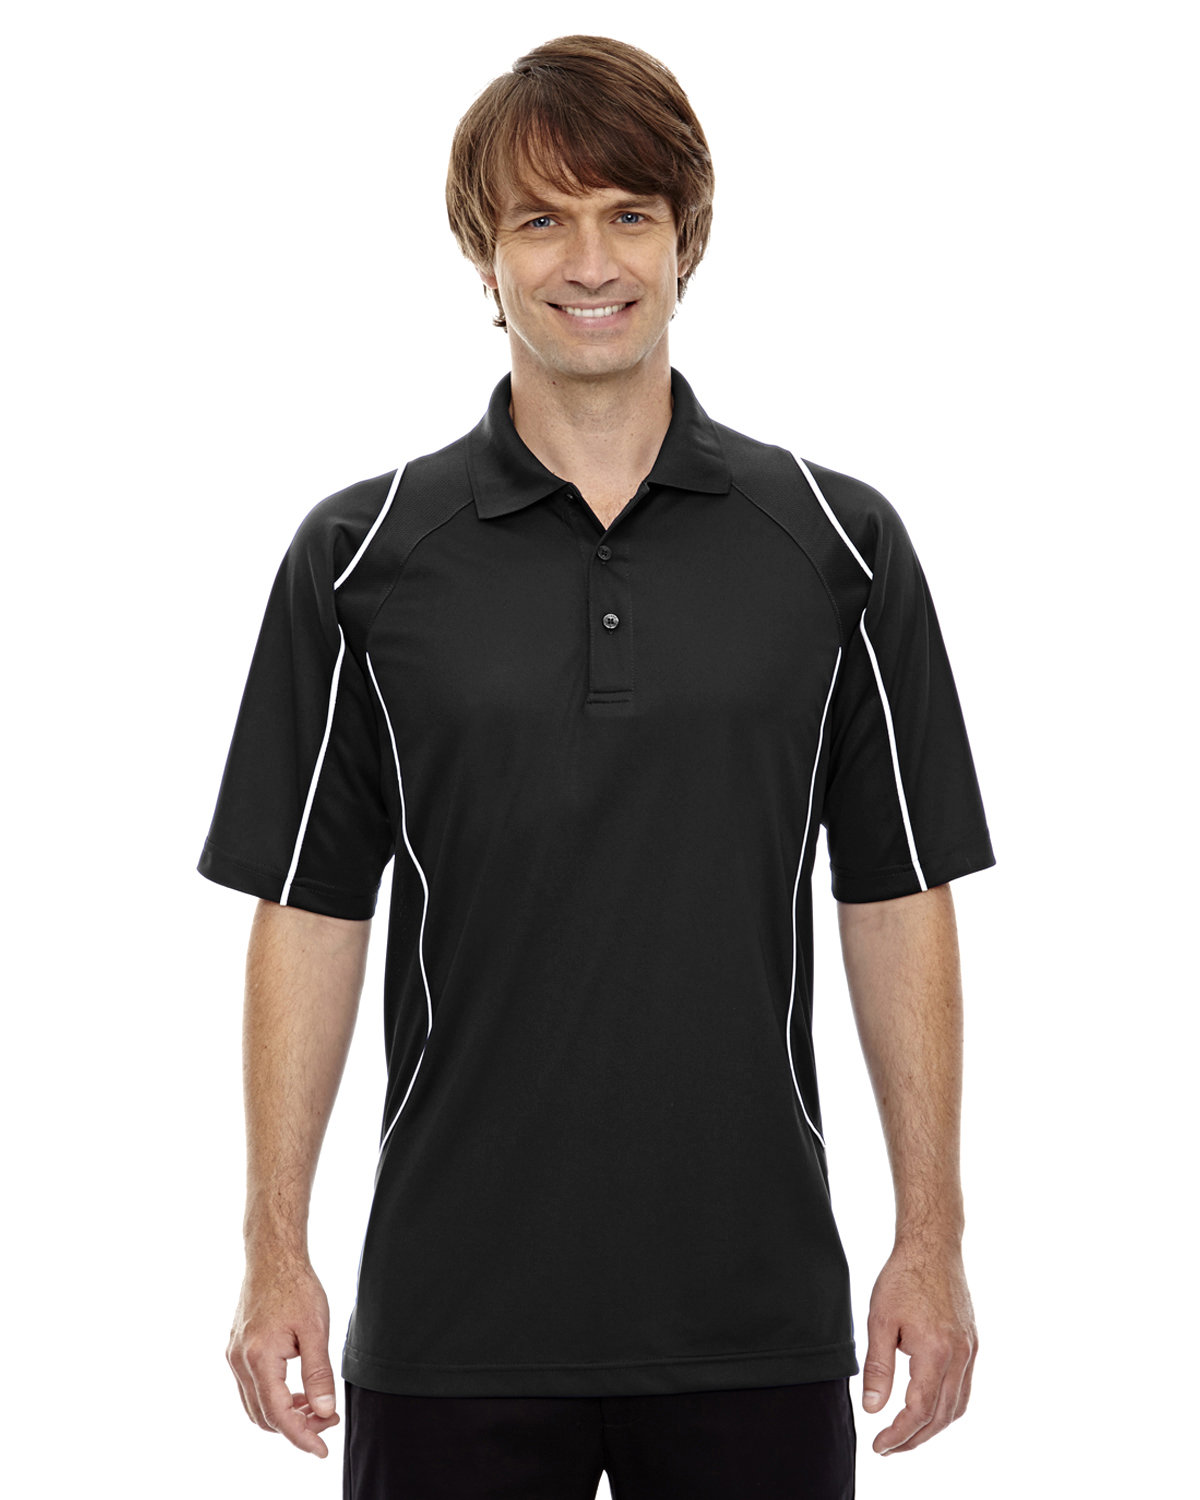 Extreme Men's Eperformance™ Velocity Snag Protection Colorblock Polo with Piping BLACK 